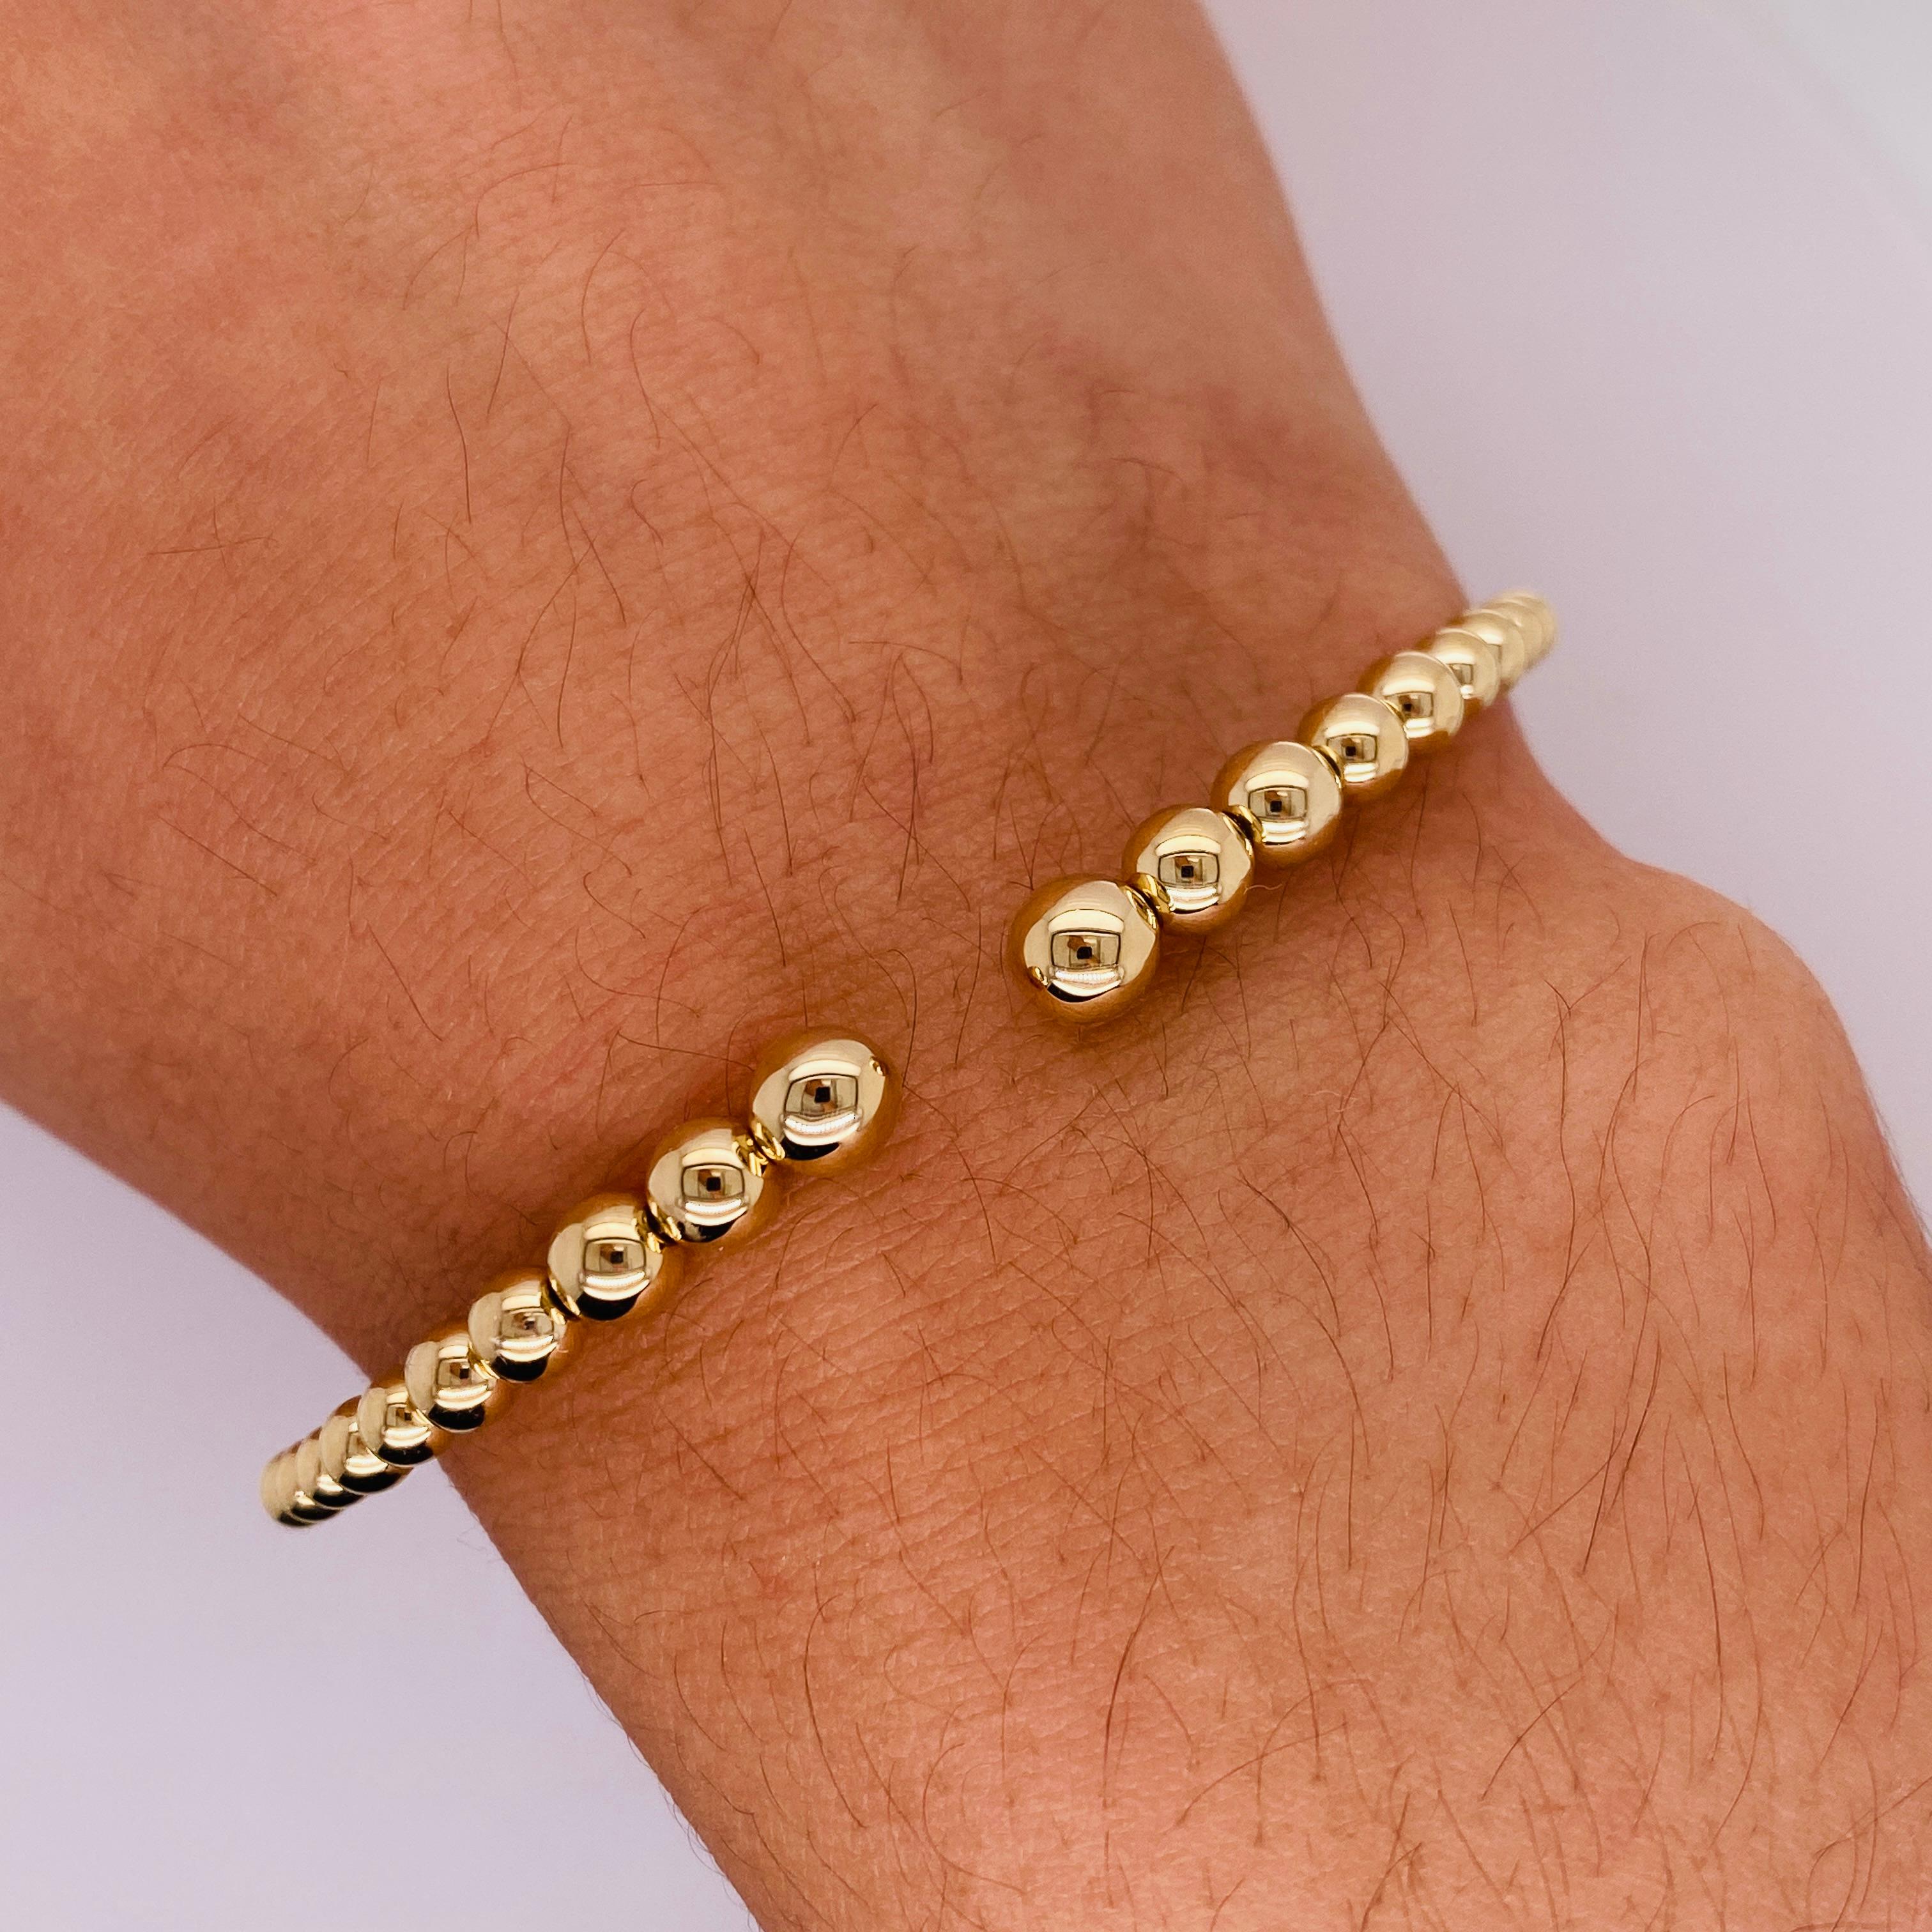 Beautifully slender and comfortable, this low-profile bangle bracelet is a winner on your wrist! You can wear it alone or stacked, perfect for any and every day wear. We love that this bracelet turns standard cuff bracelet design on its head by